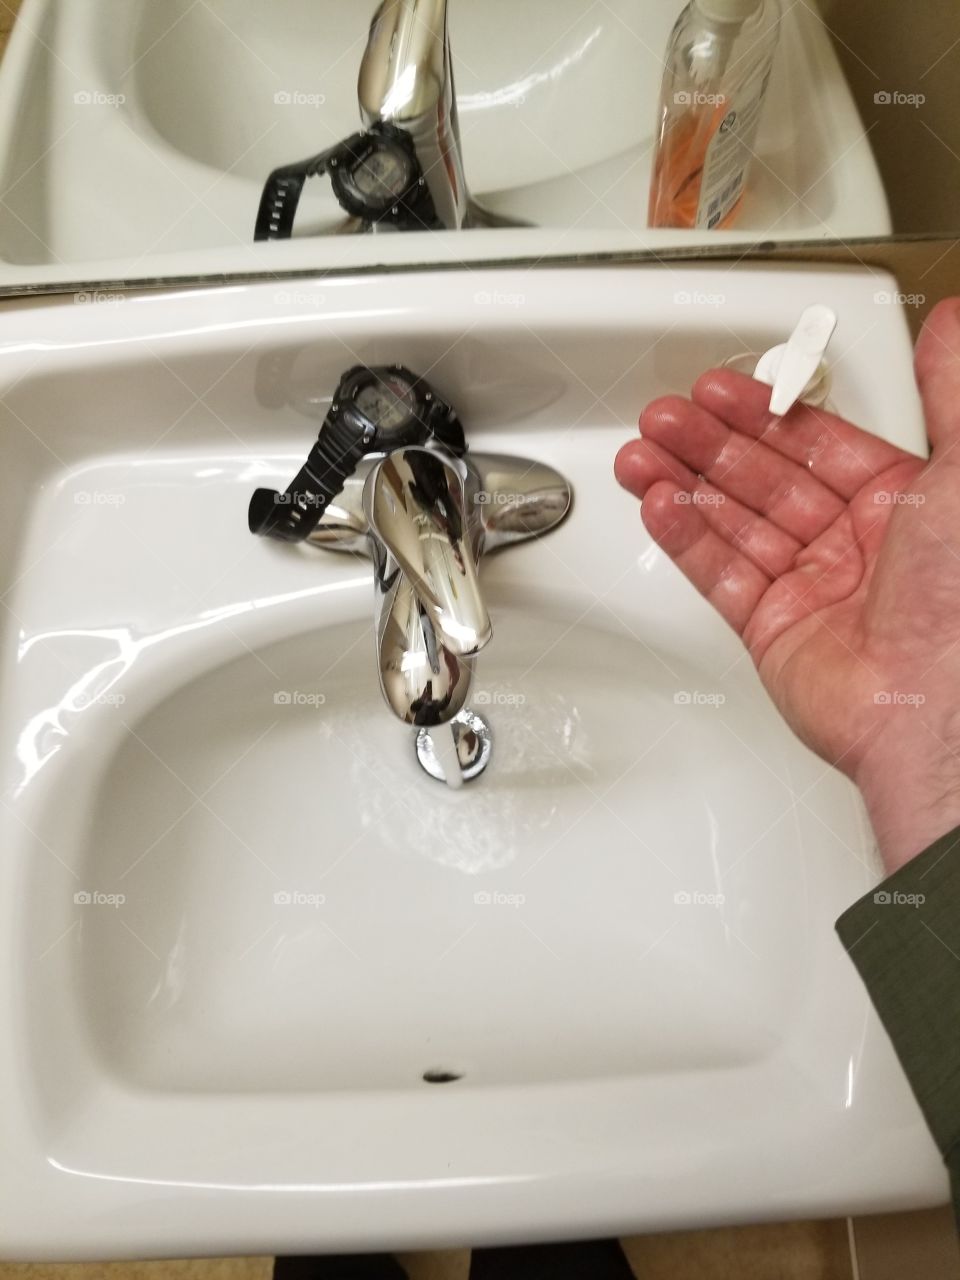 Clean hands are happy hands